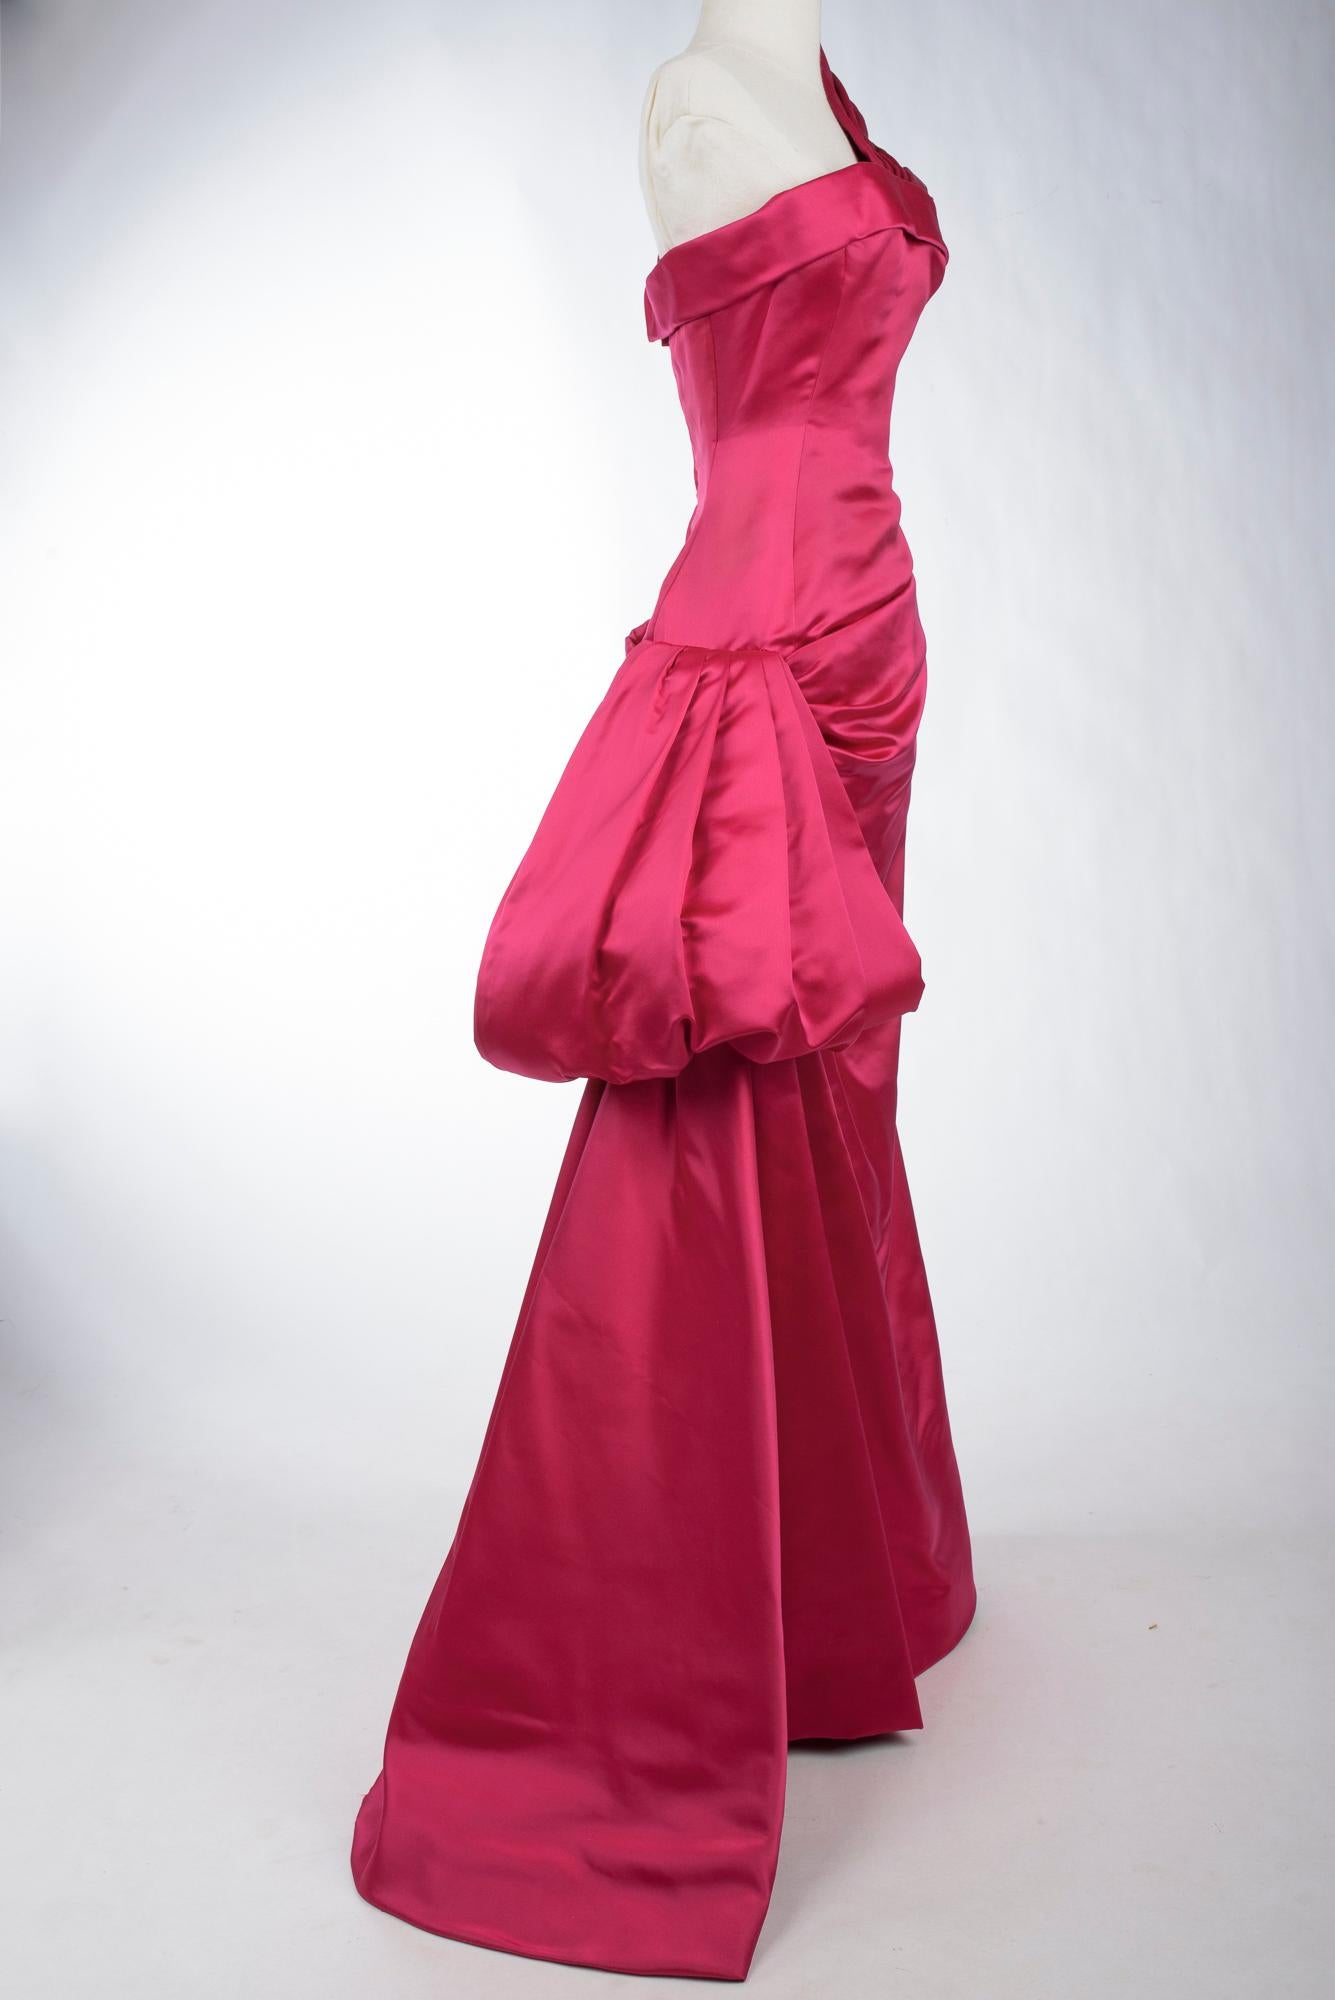 A Christian Dior Haute Couture Evening Dress Numbered 218551 Circa 1959-1965 For Sale 7